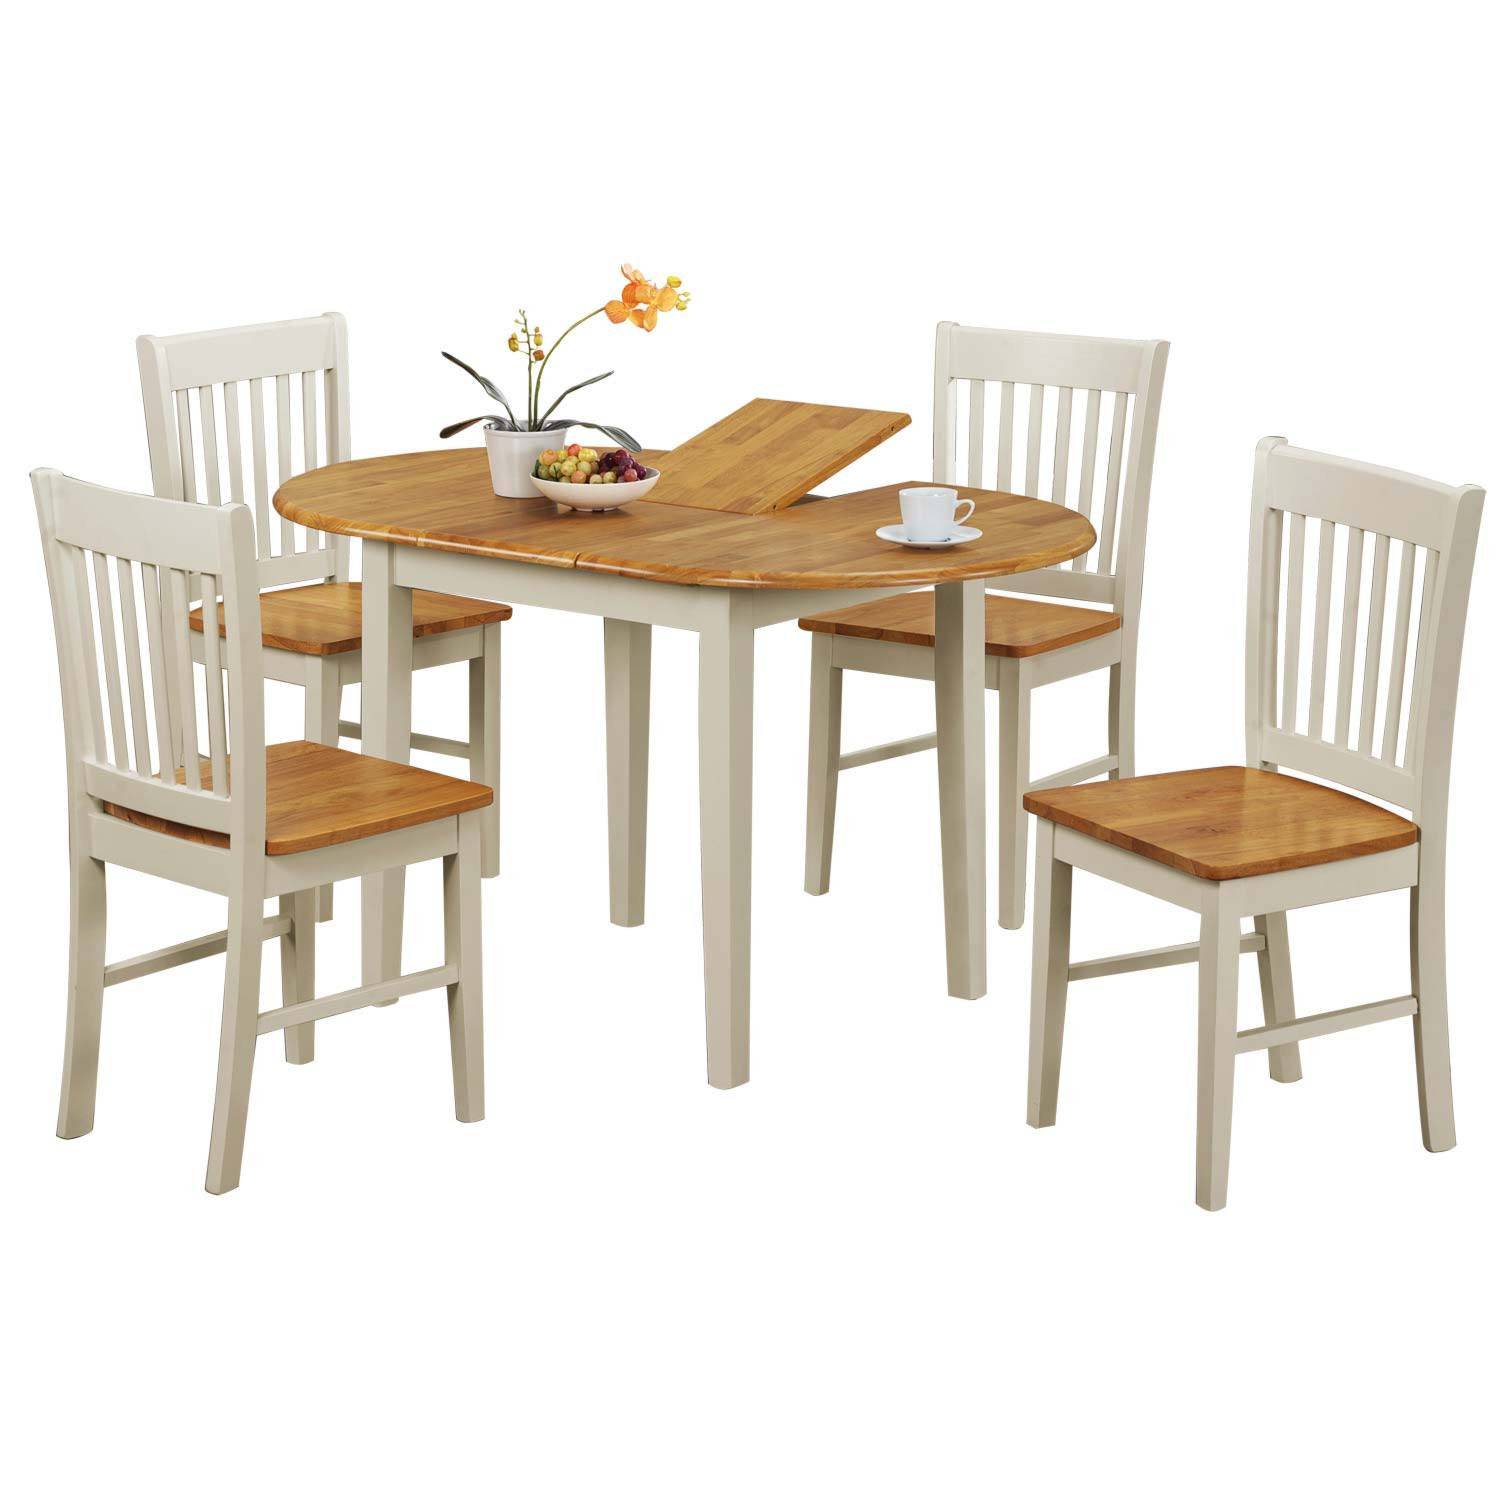 Kentucky Extending Dining Table And Four Chairs Set pertaining to size 1500 X 1500